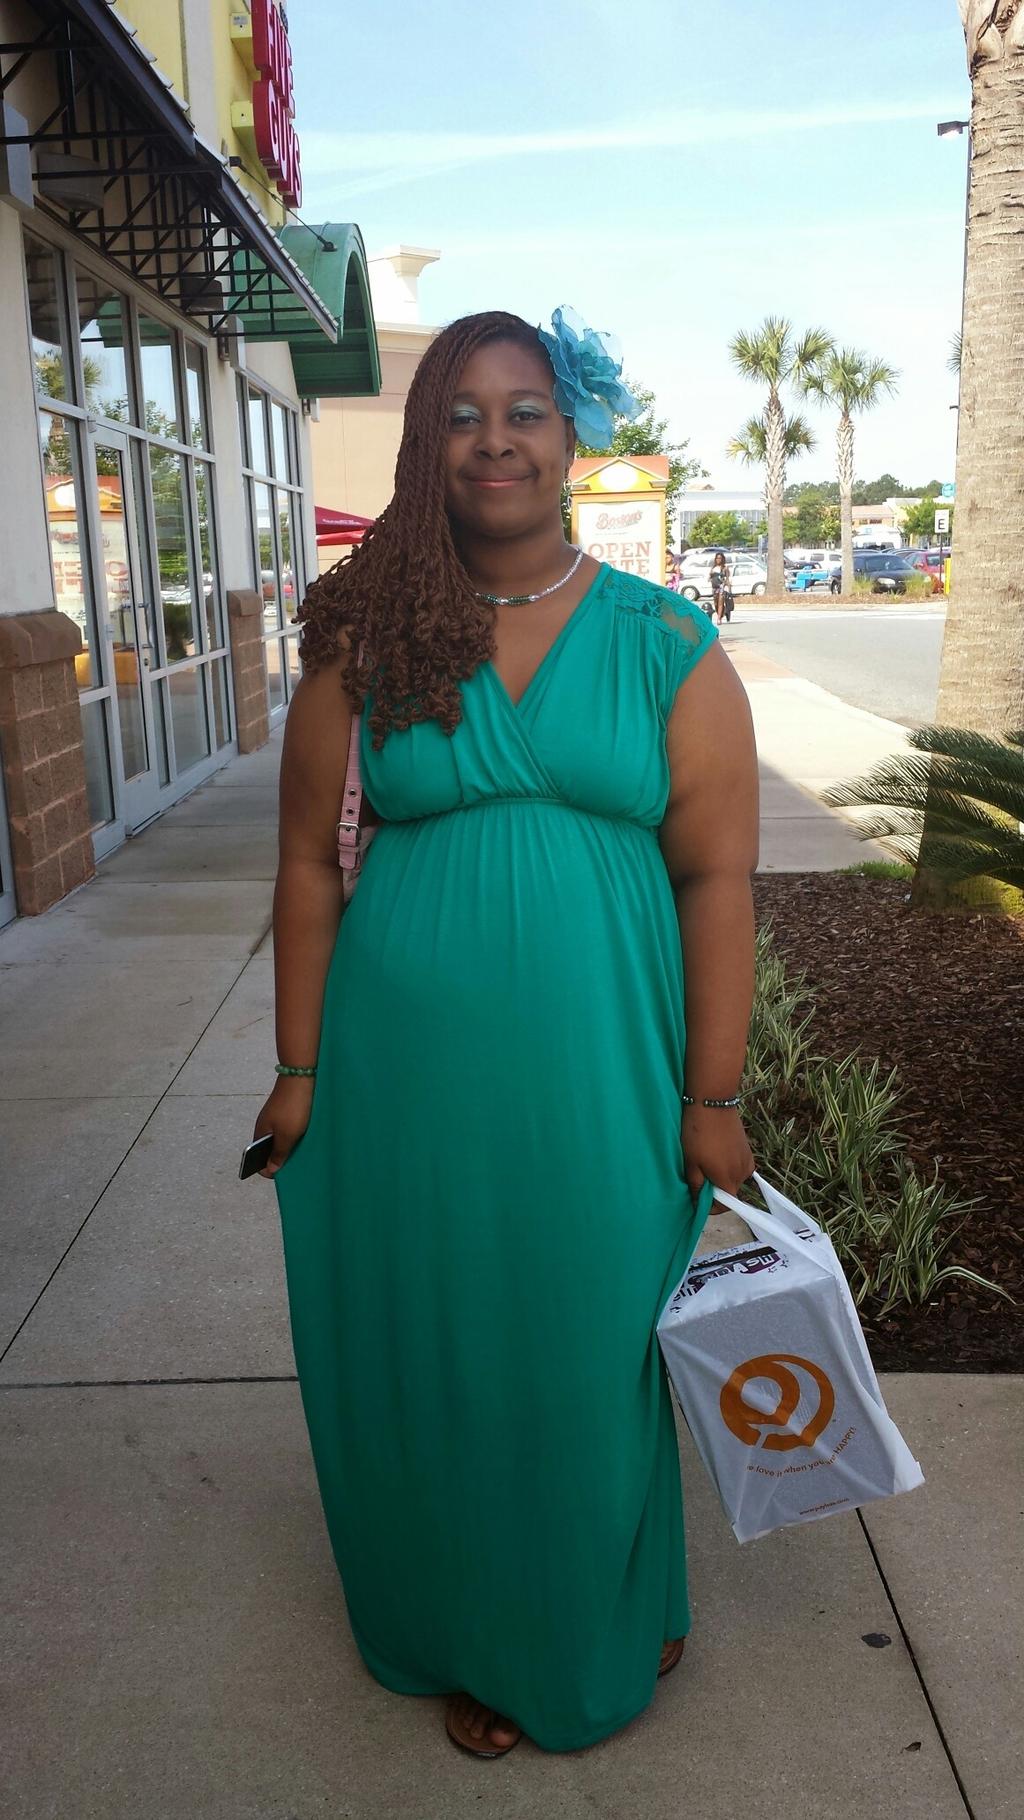 This event took place on Saturday, May 17, 2014 at Payless, River City